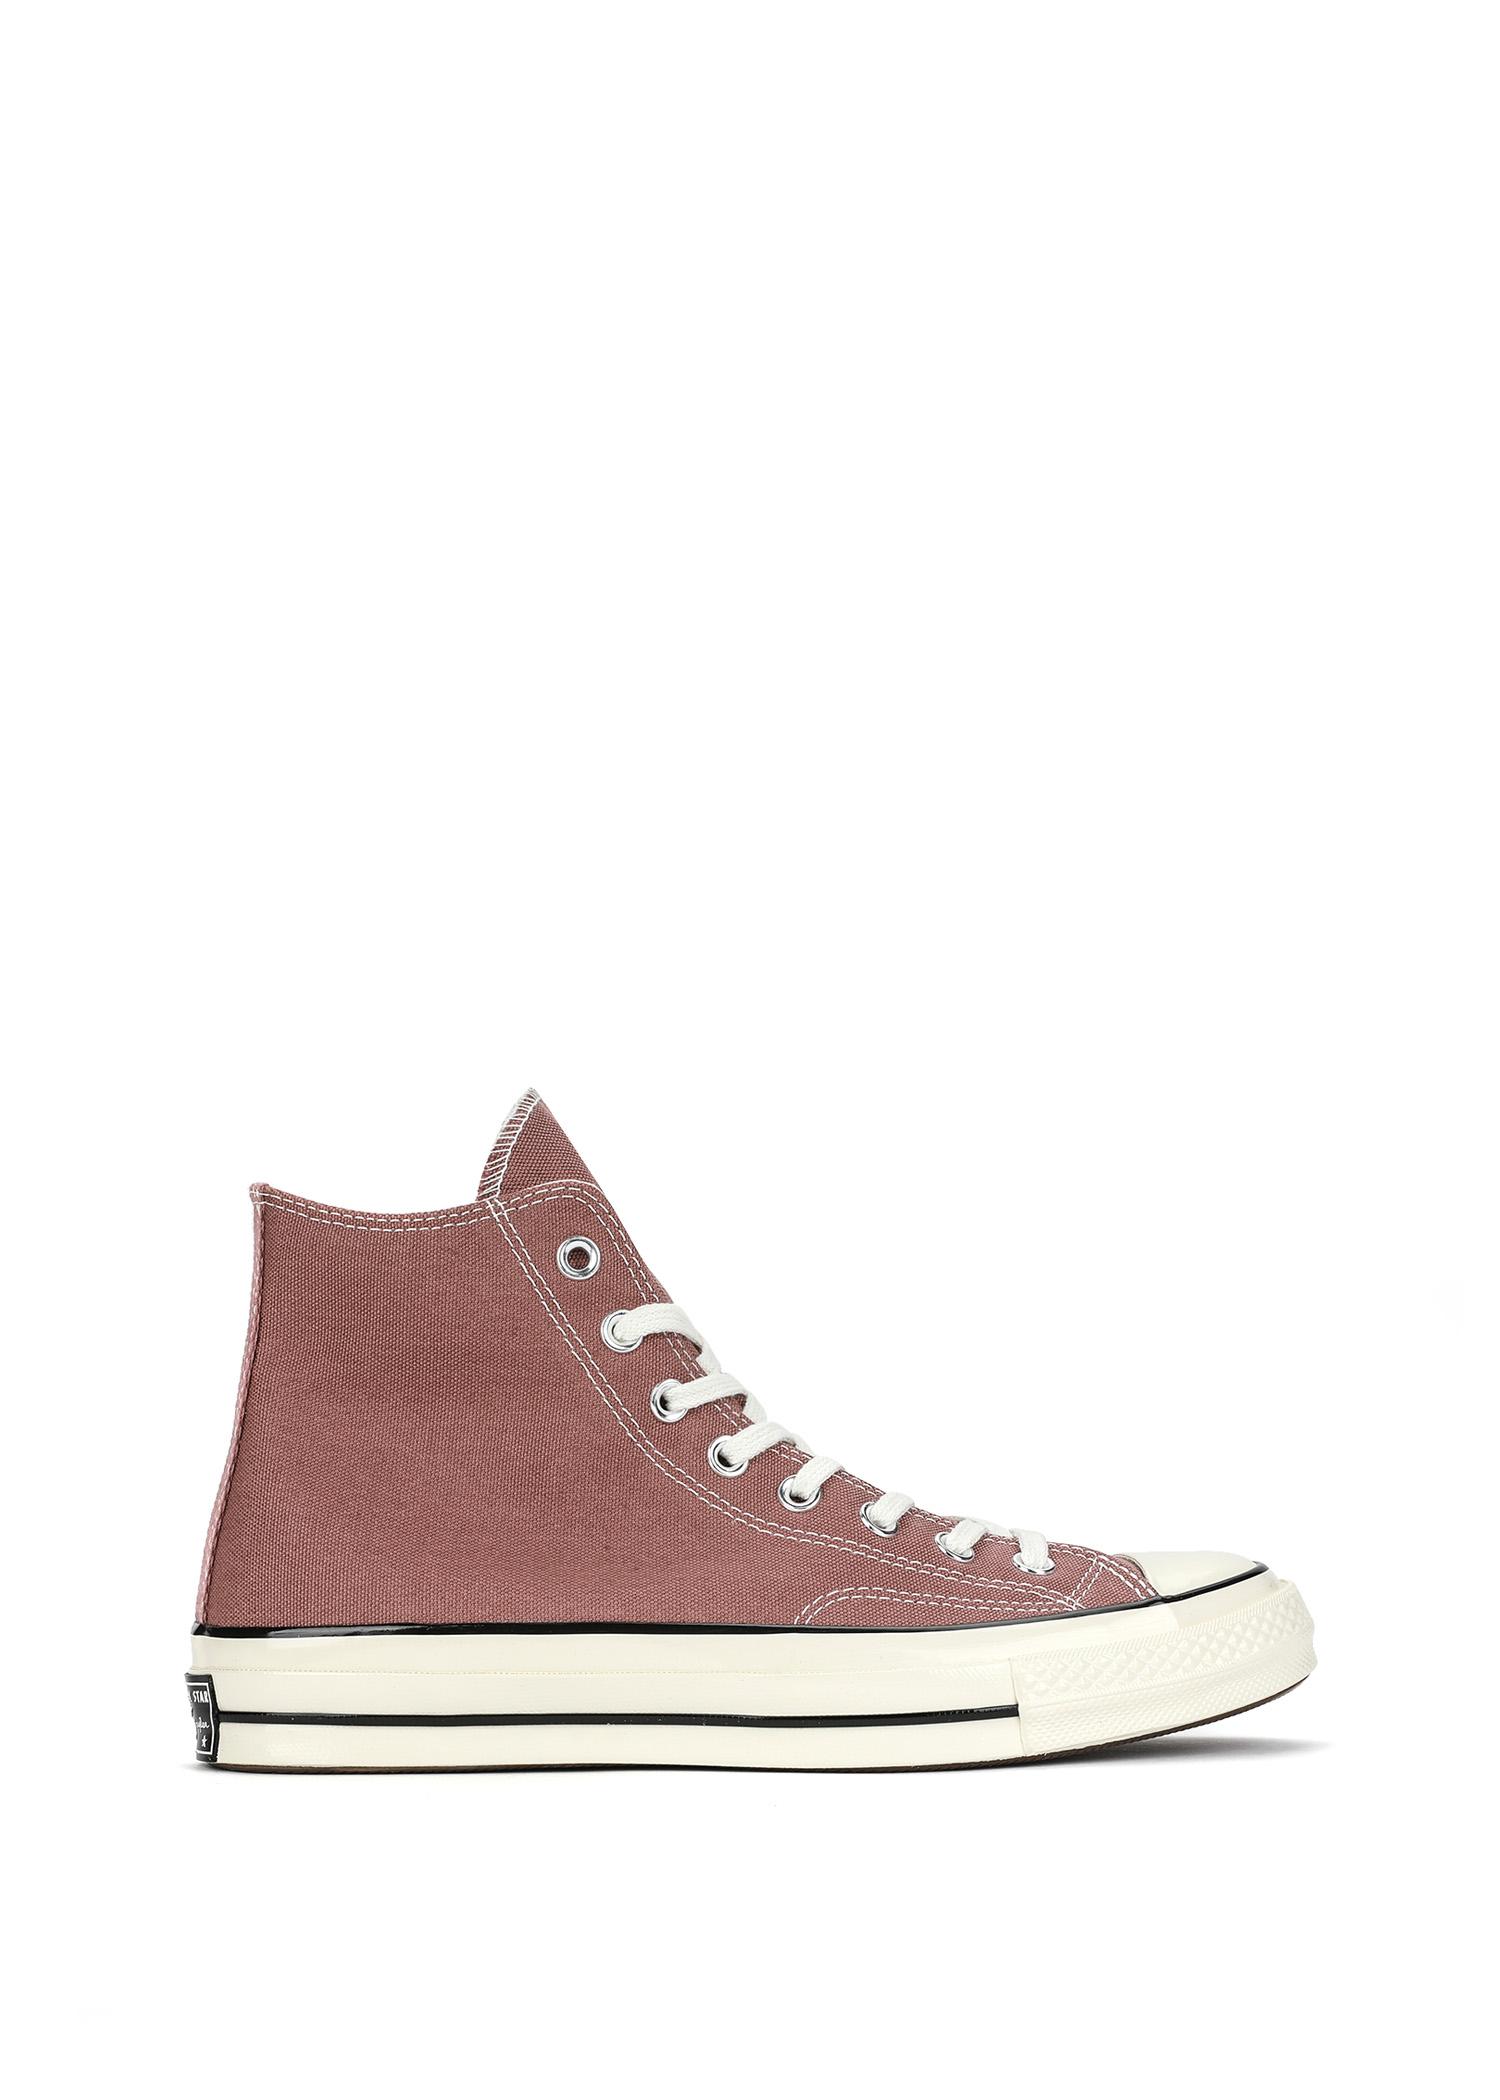 converse taupe